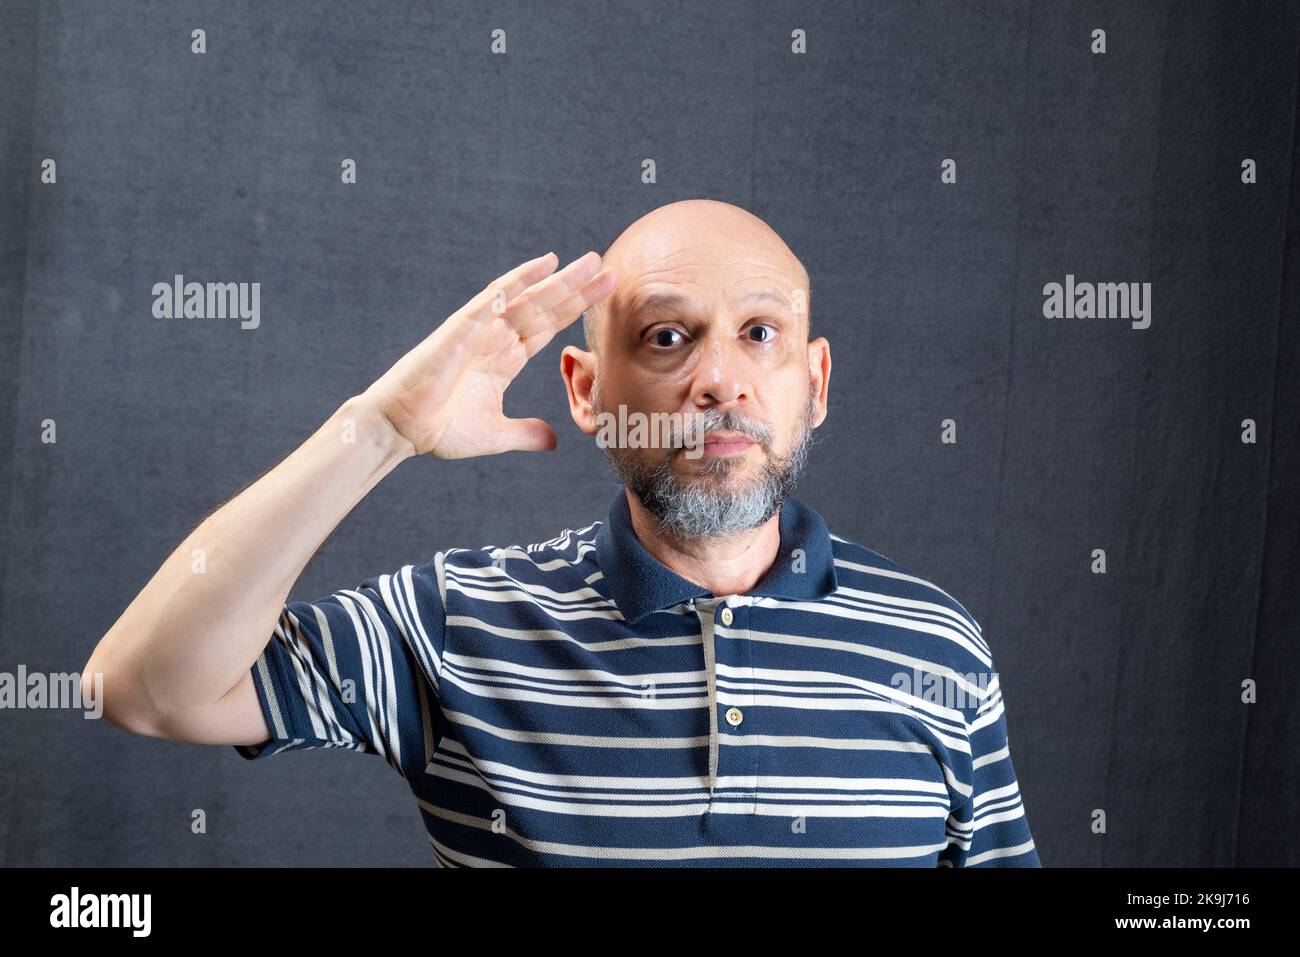 Cheerful funny young bearded business man in classic striped shirt standing making hand gestures. Isolated on gray background studio portrait. Achieve Stock Photo